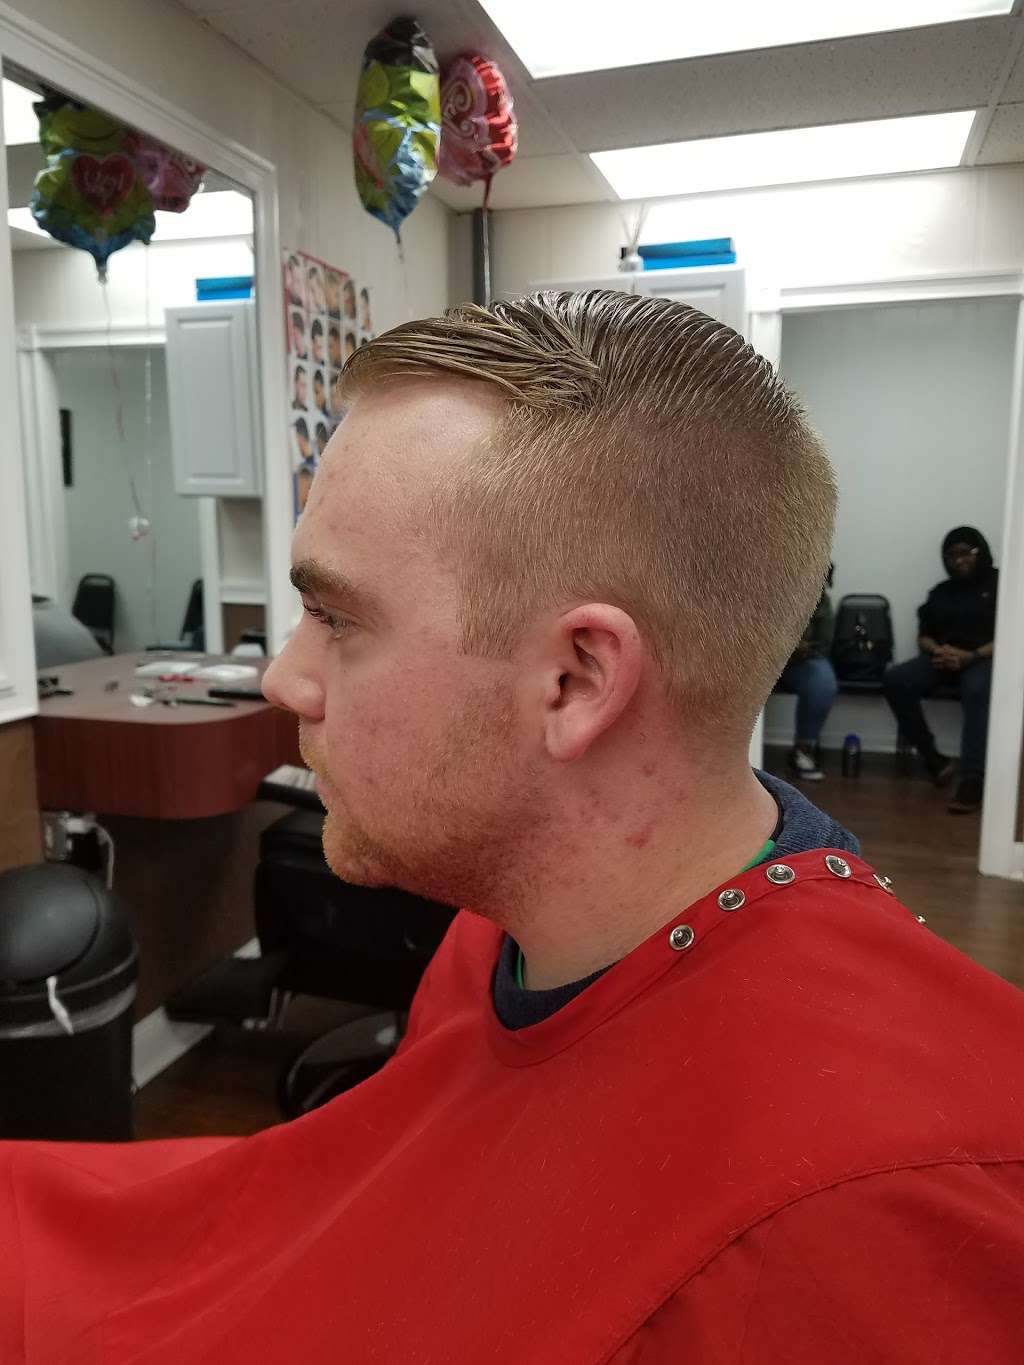 Razor Right Barbershop | 82 Central St, Somerville, MA 02145, USA | Phone: (617) 718-9089